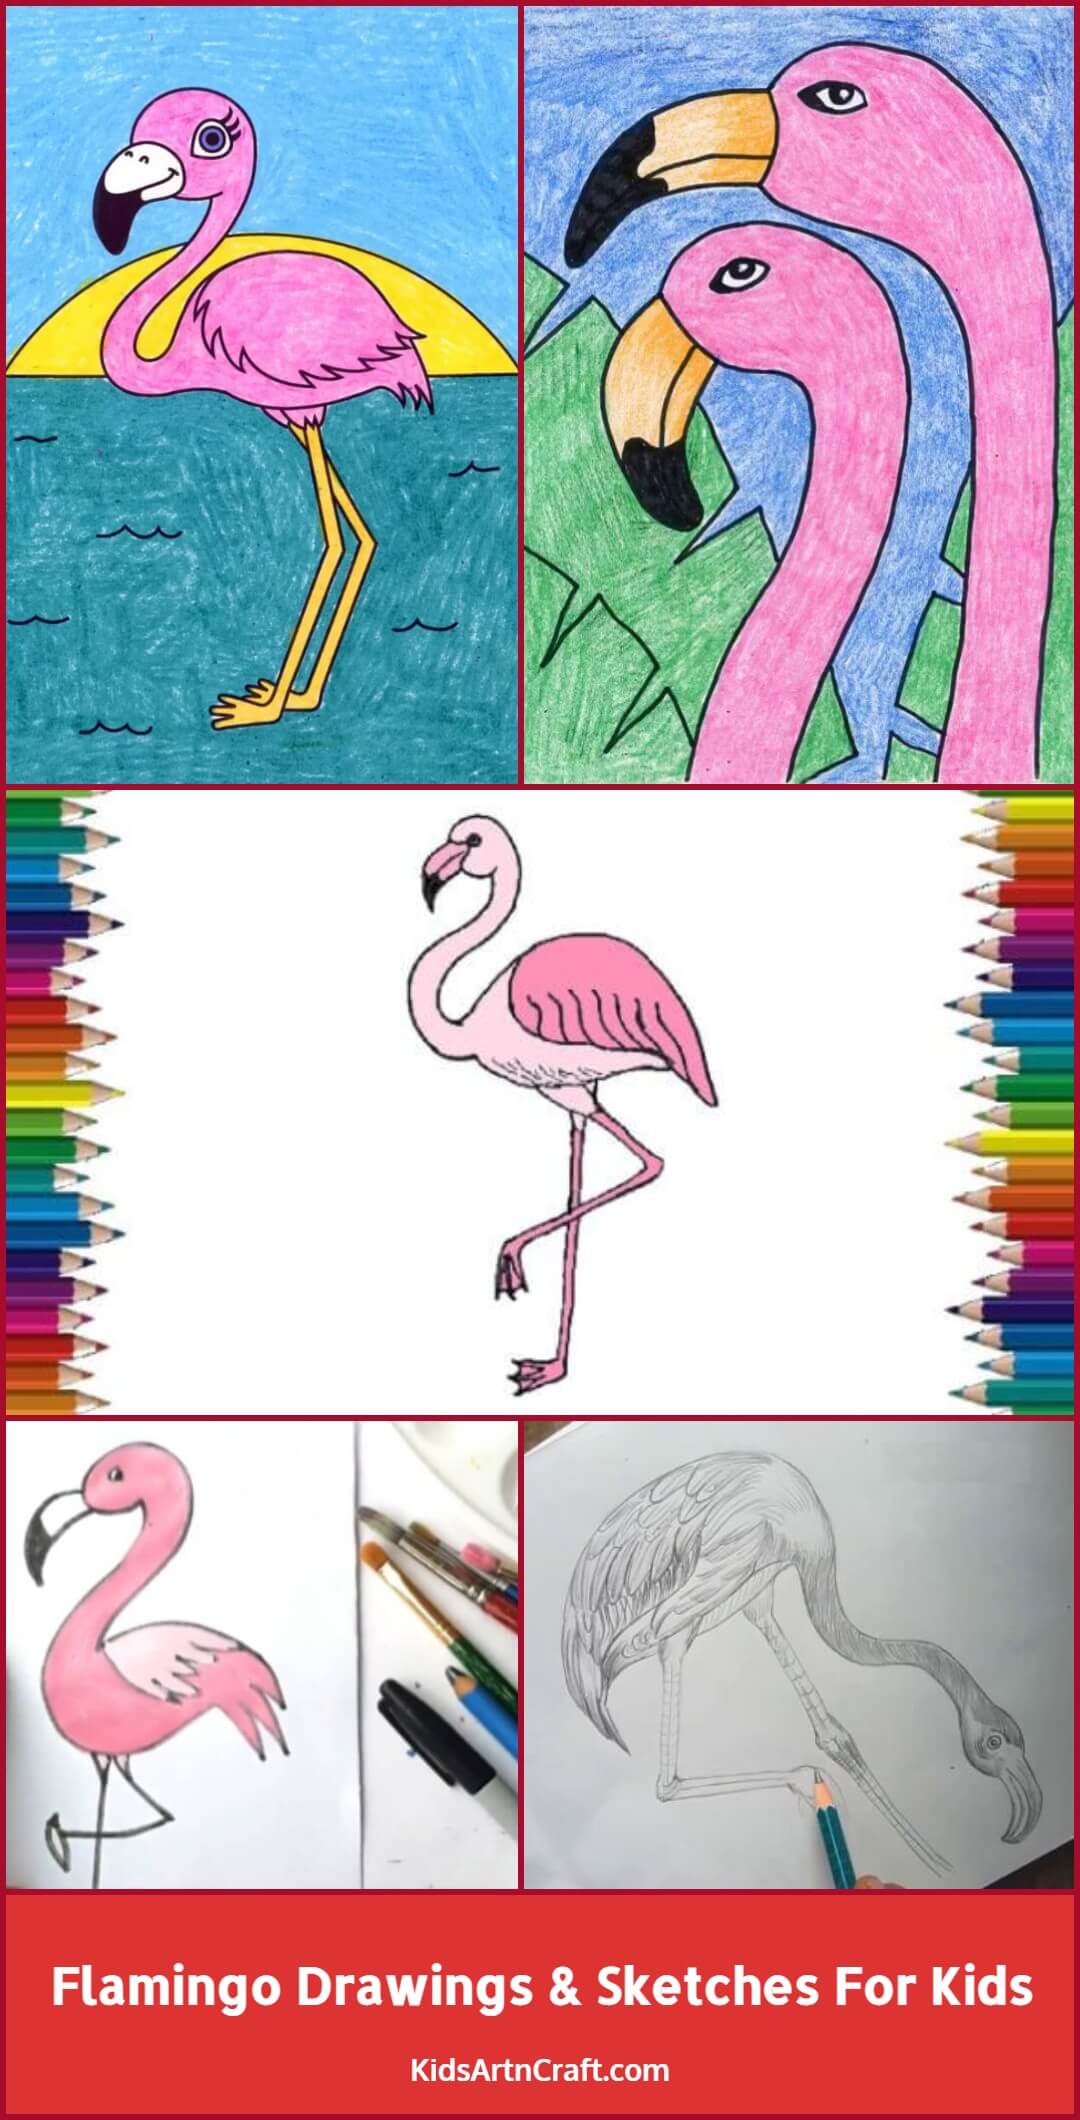 Flamingo Drawings & Sketches For Kids